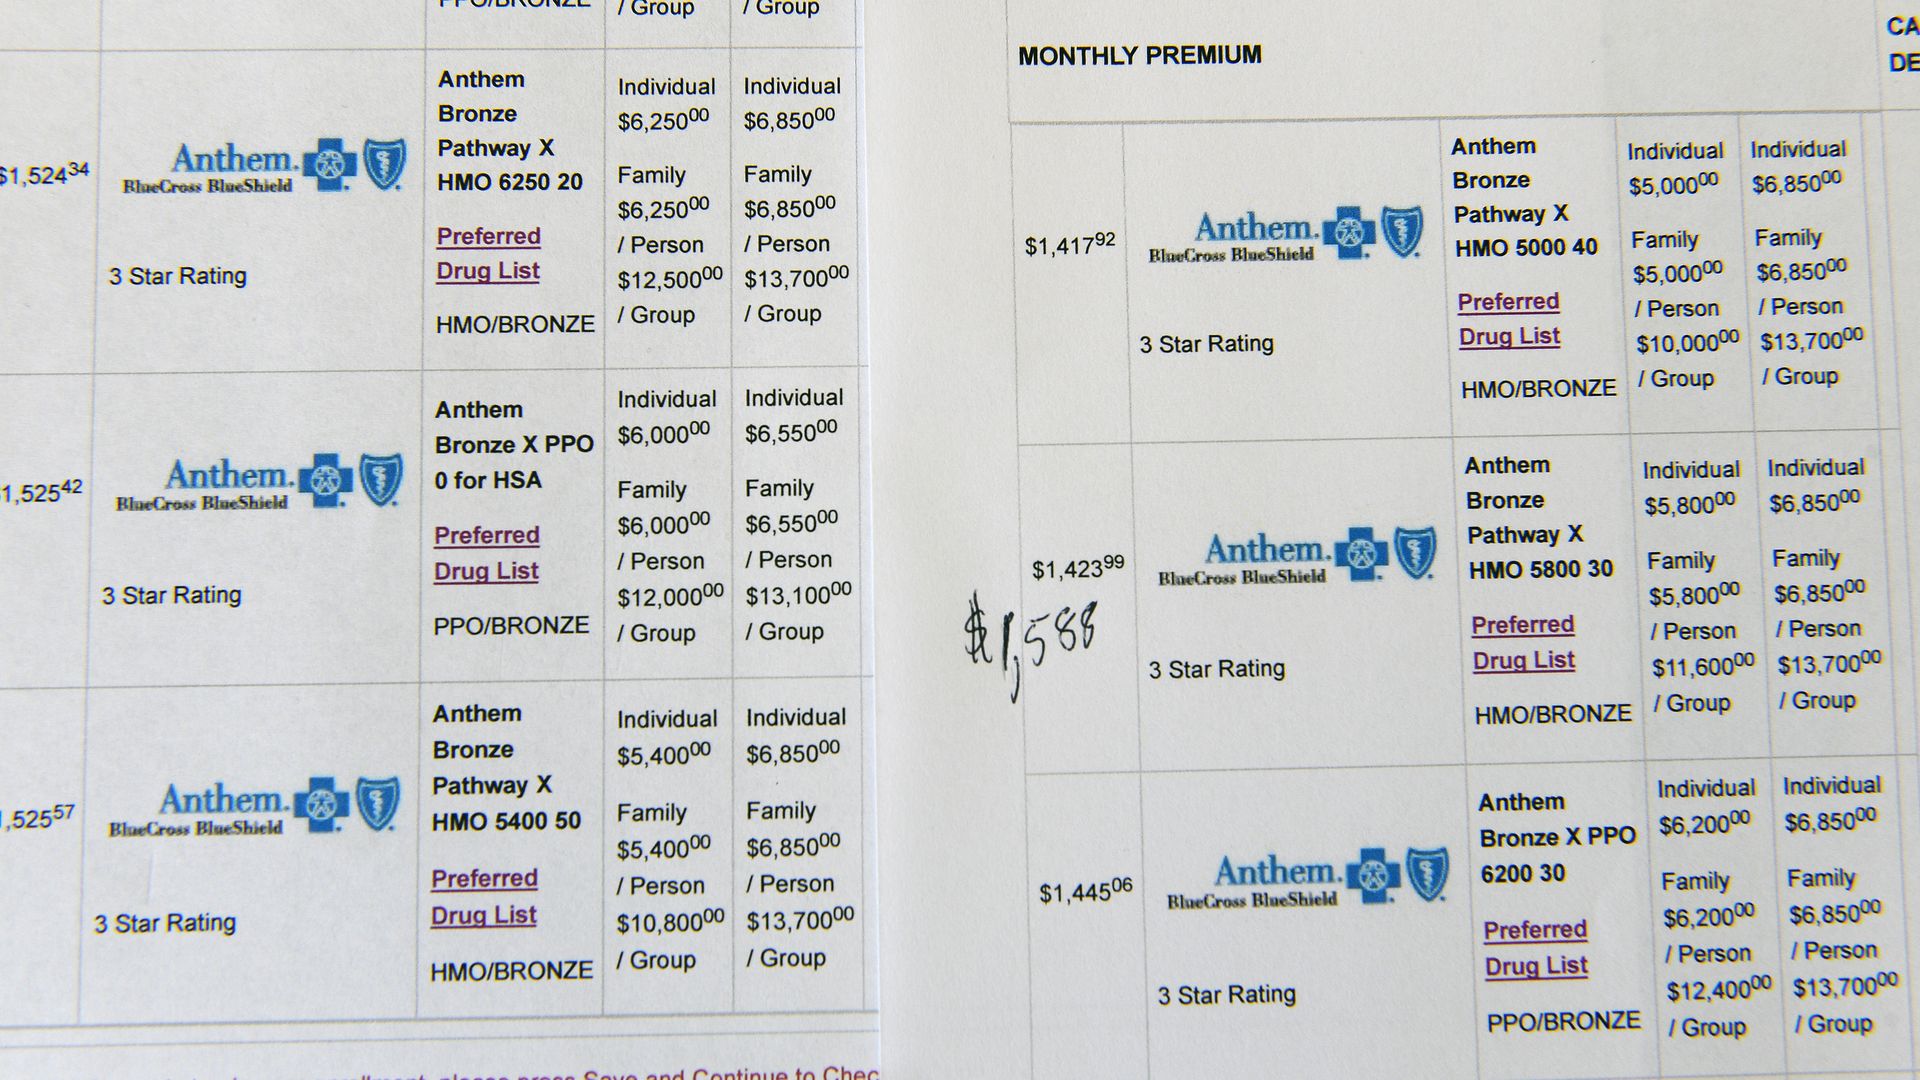 A monthly statement showing premiums for Anthem Blue Cross Blue Shield.